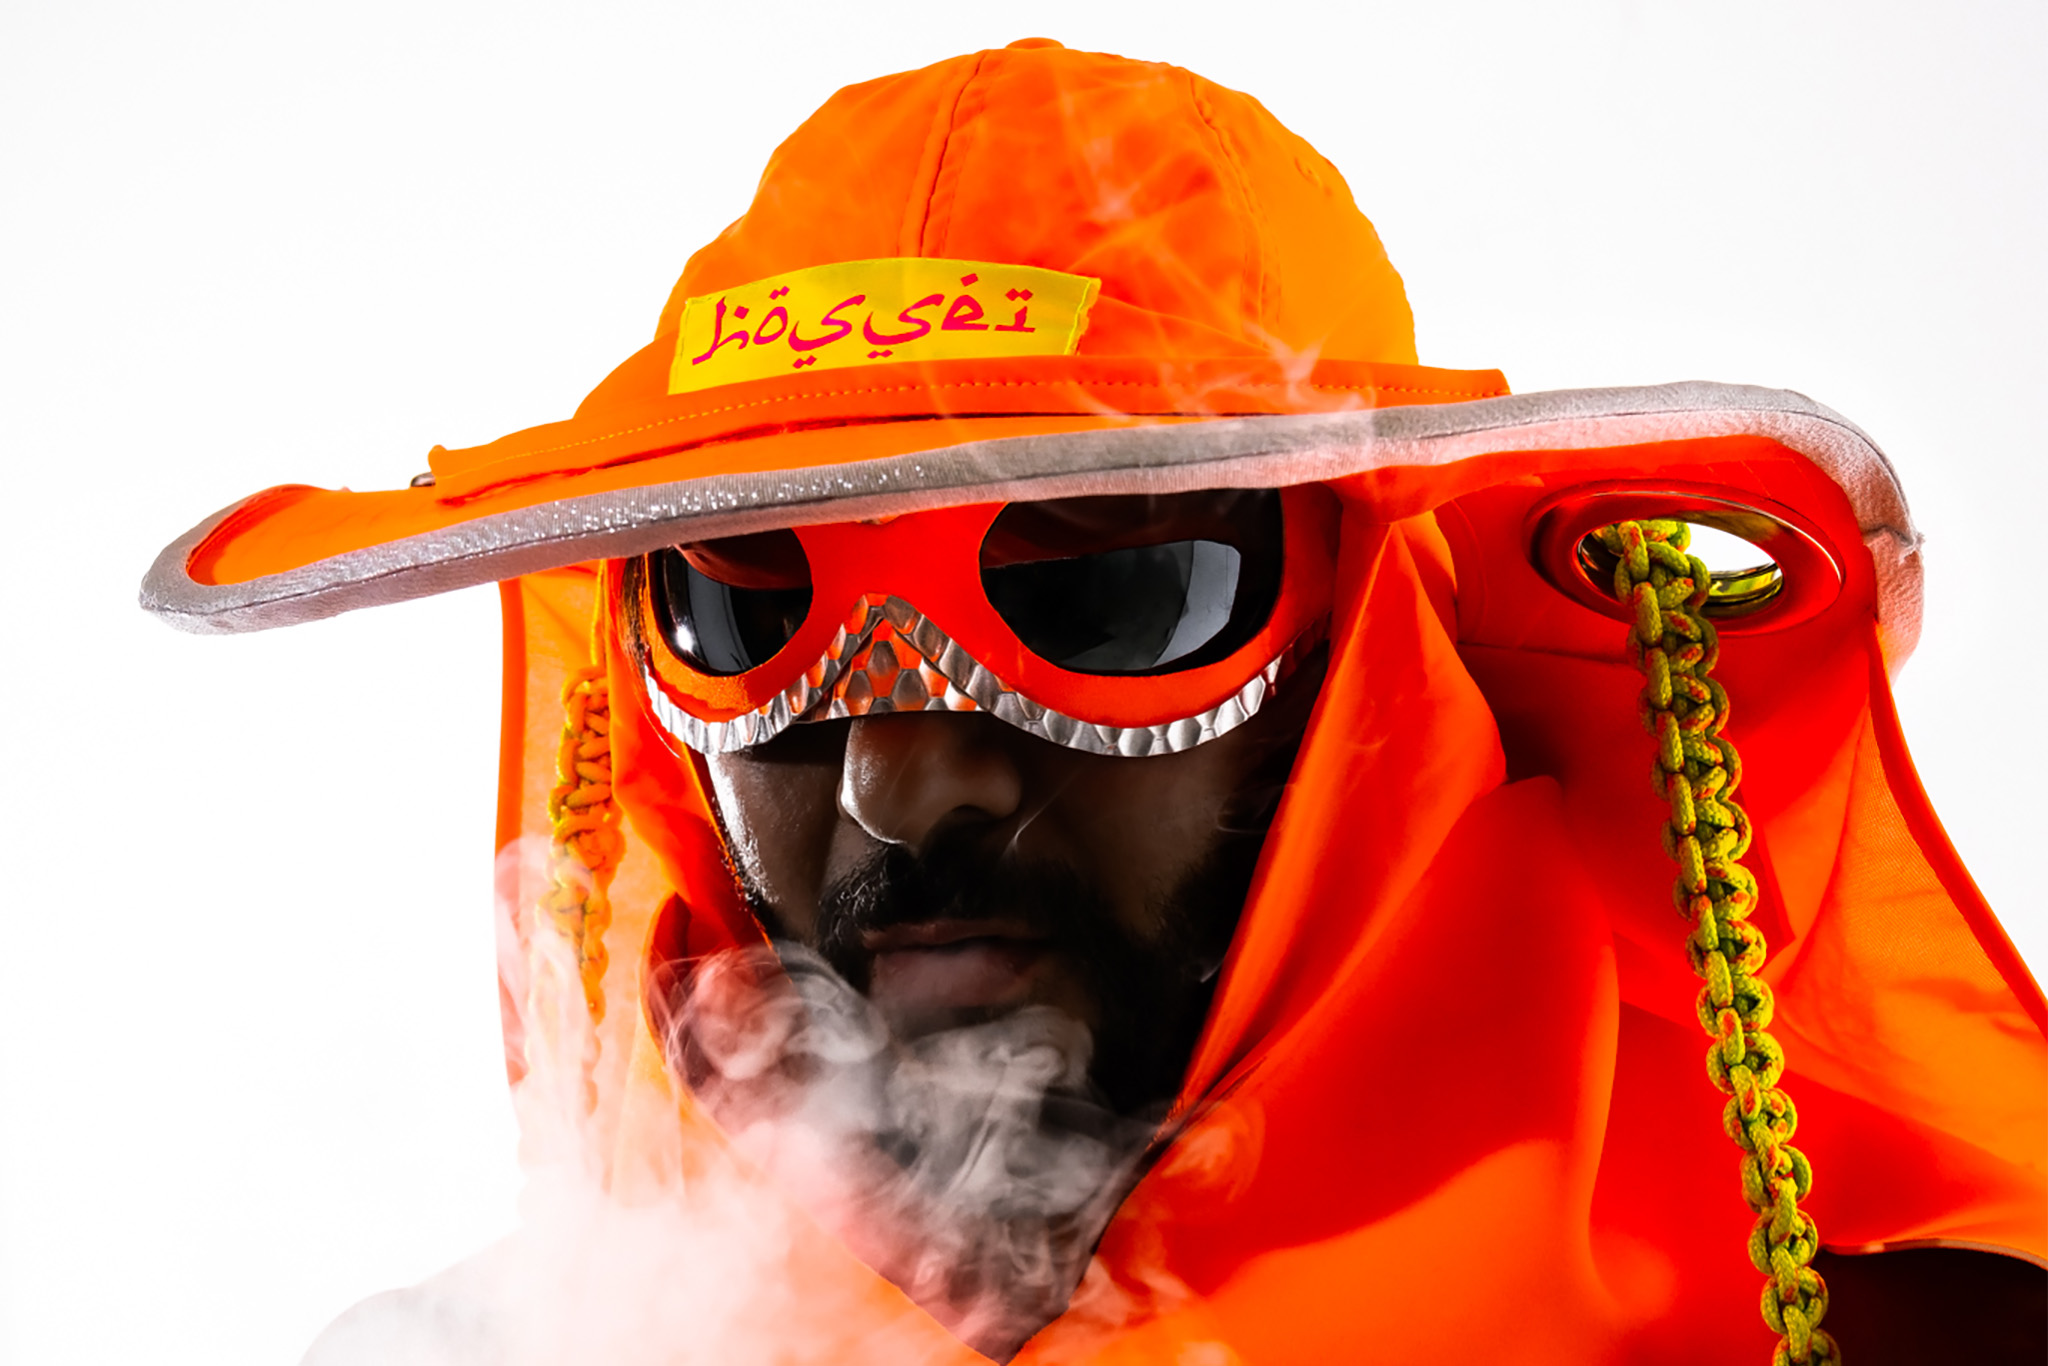 A masked figure wears a bright orange hat and glasses, they blow smoke towards the camera. 